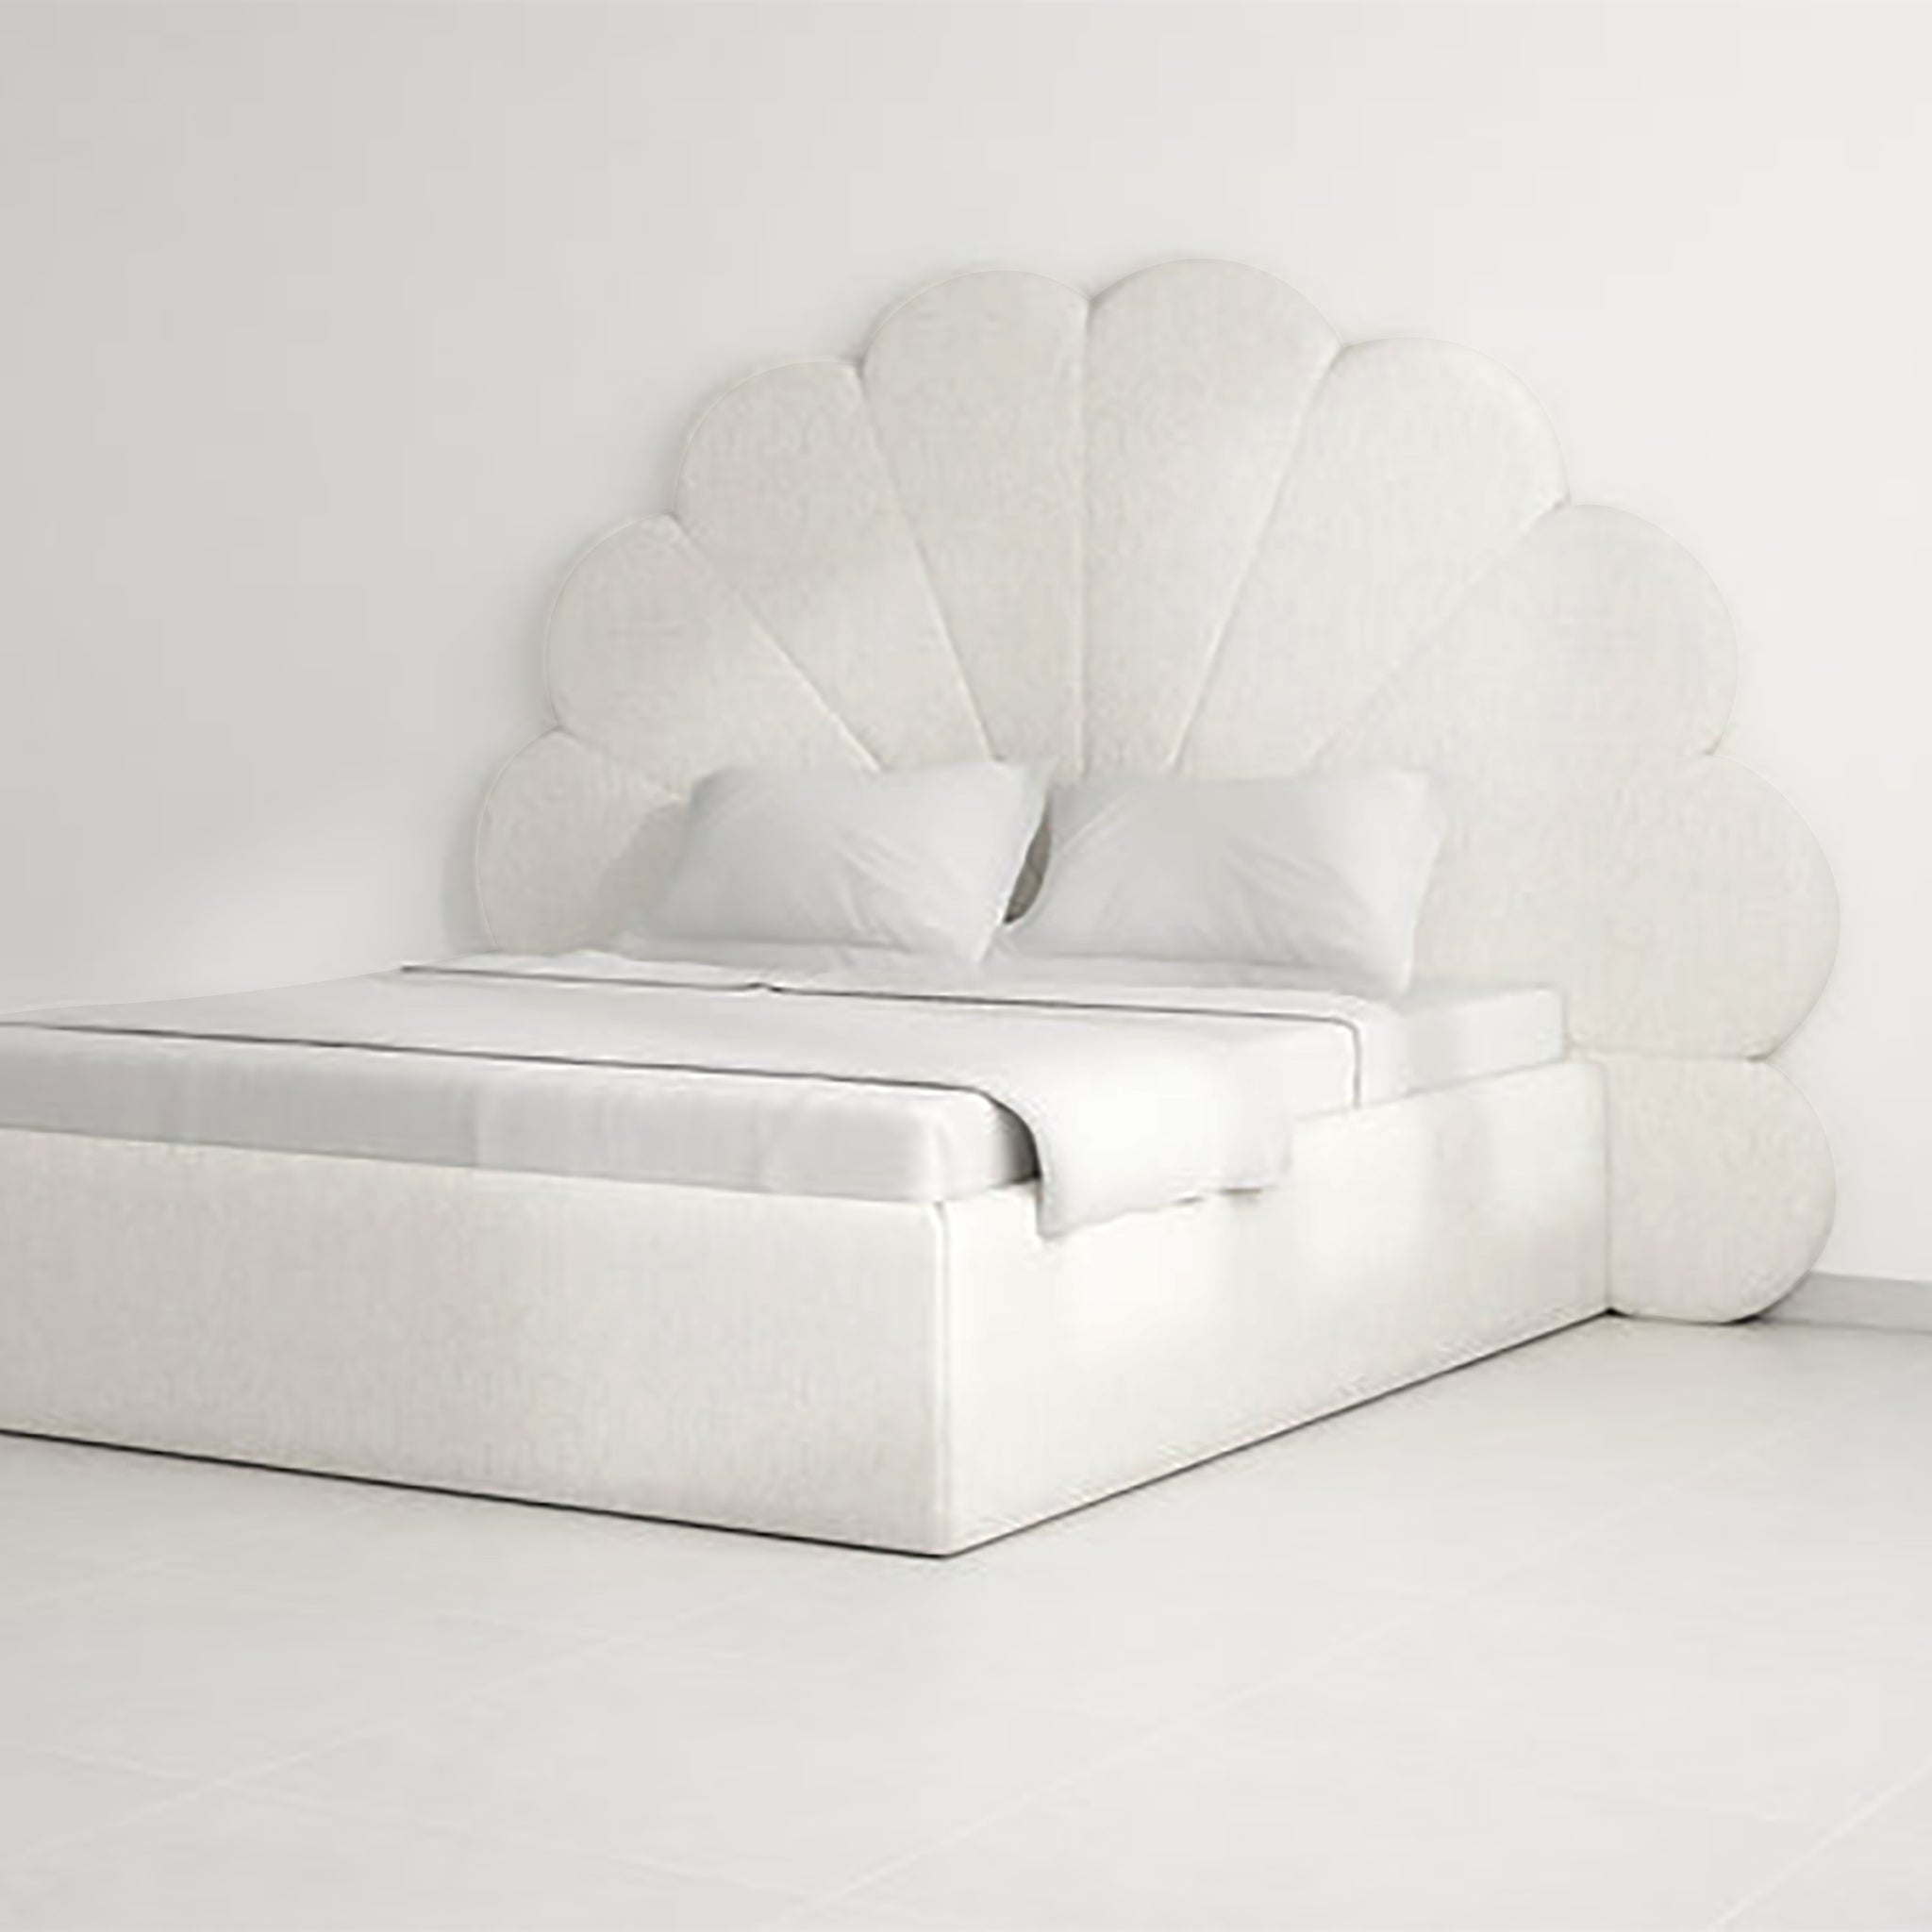 Elegant and tranquil Kyle Bed with ocean wave design